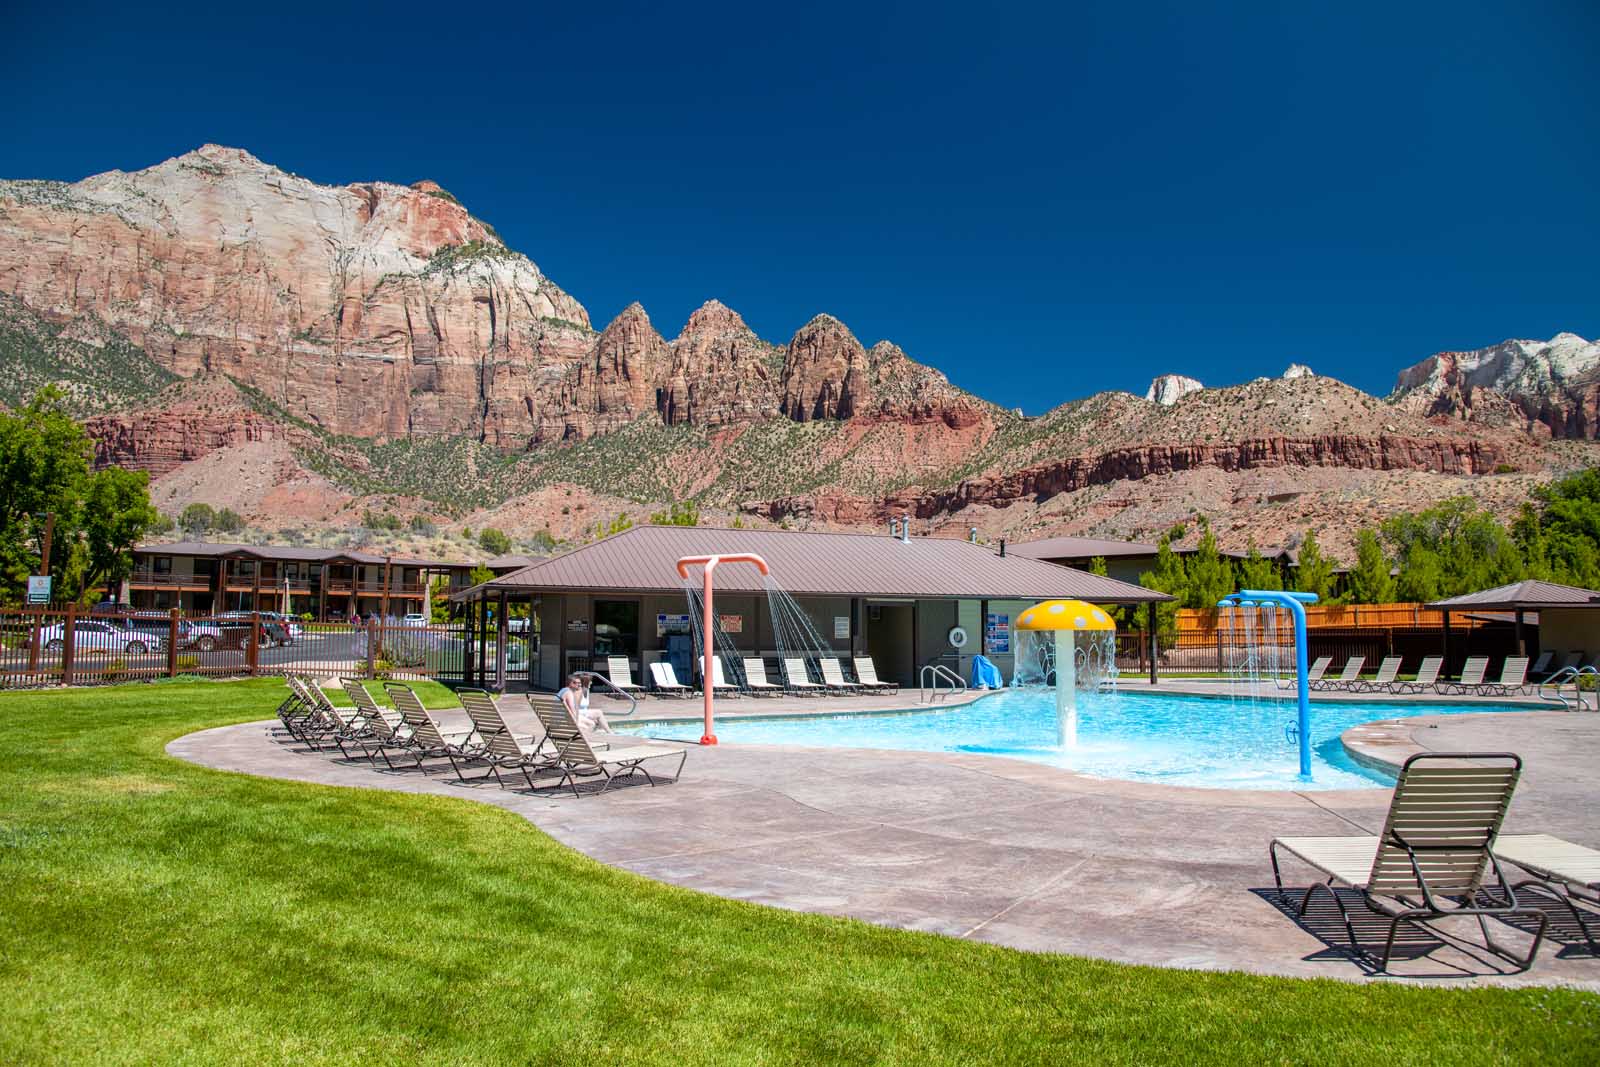 Best Areas to stay near Zion National Park